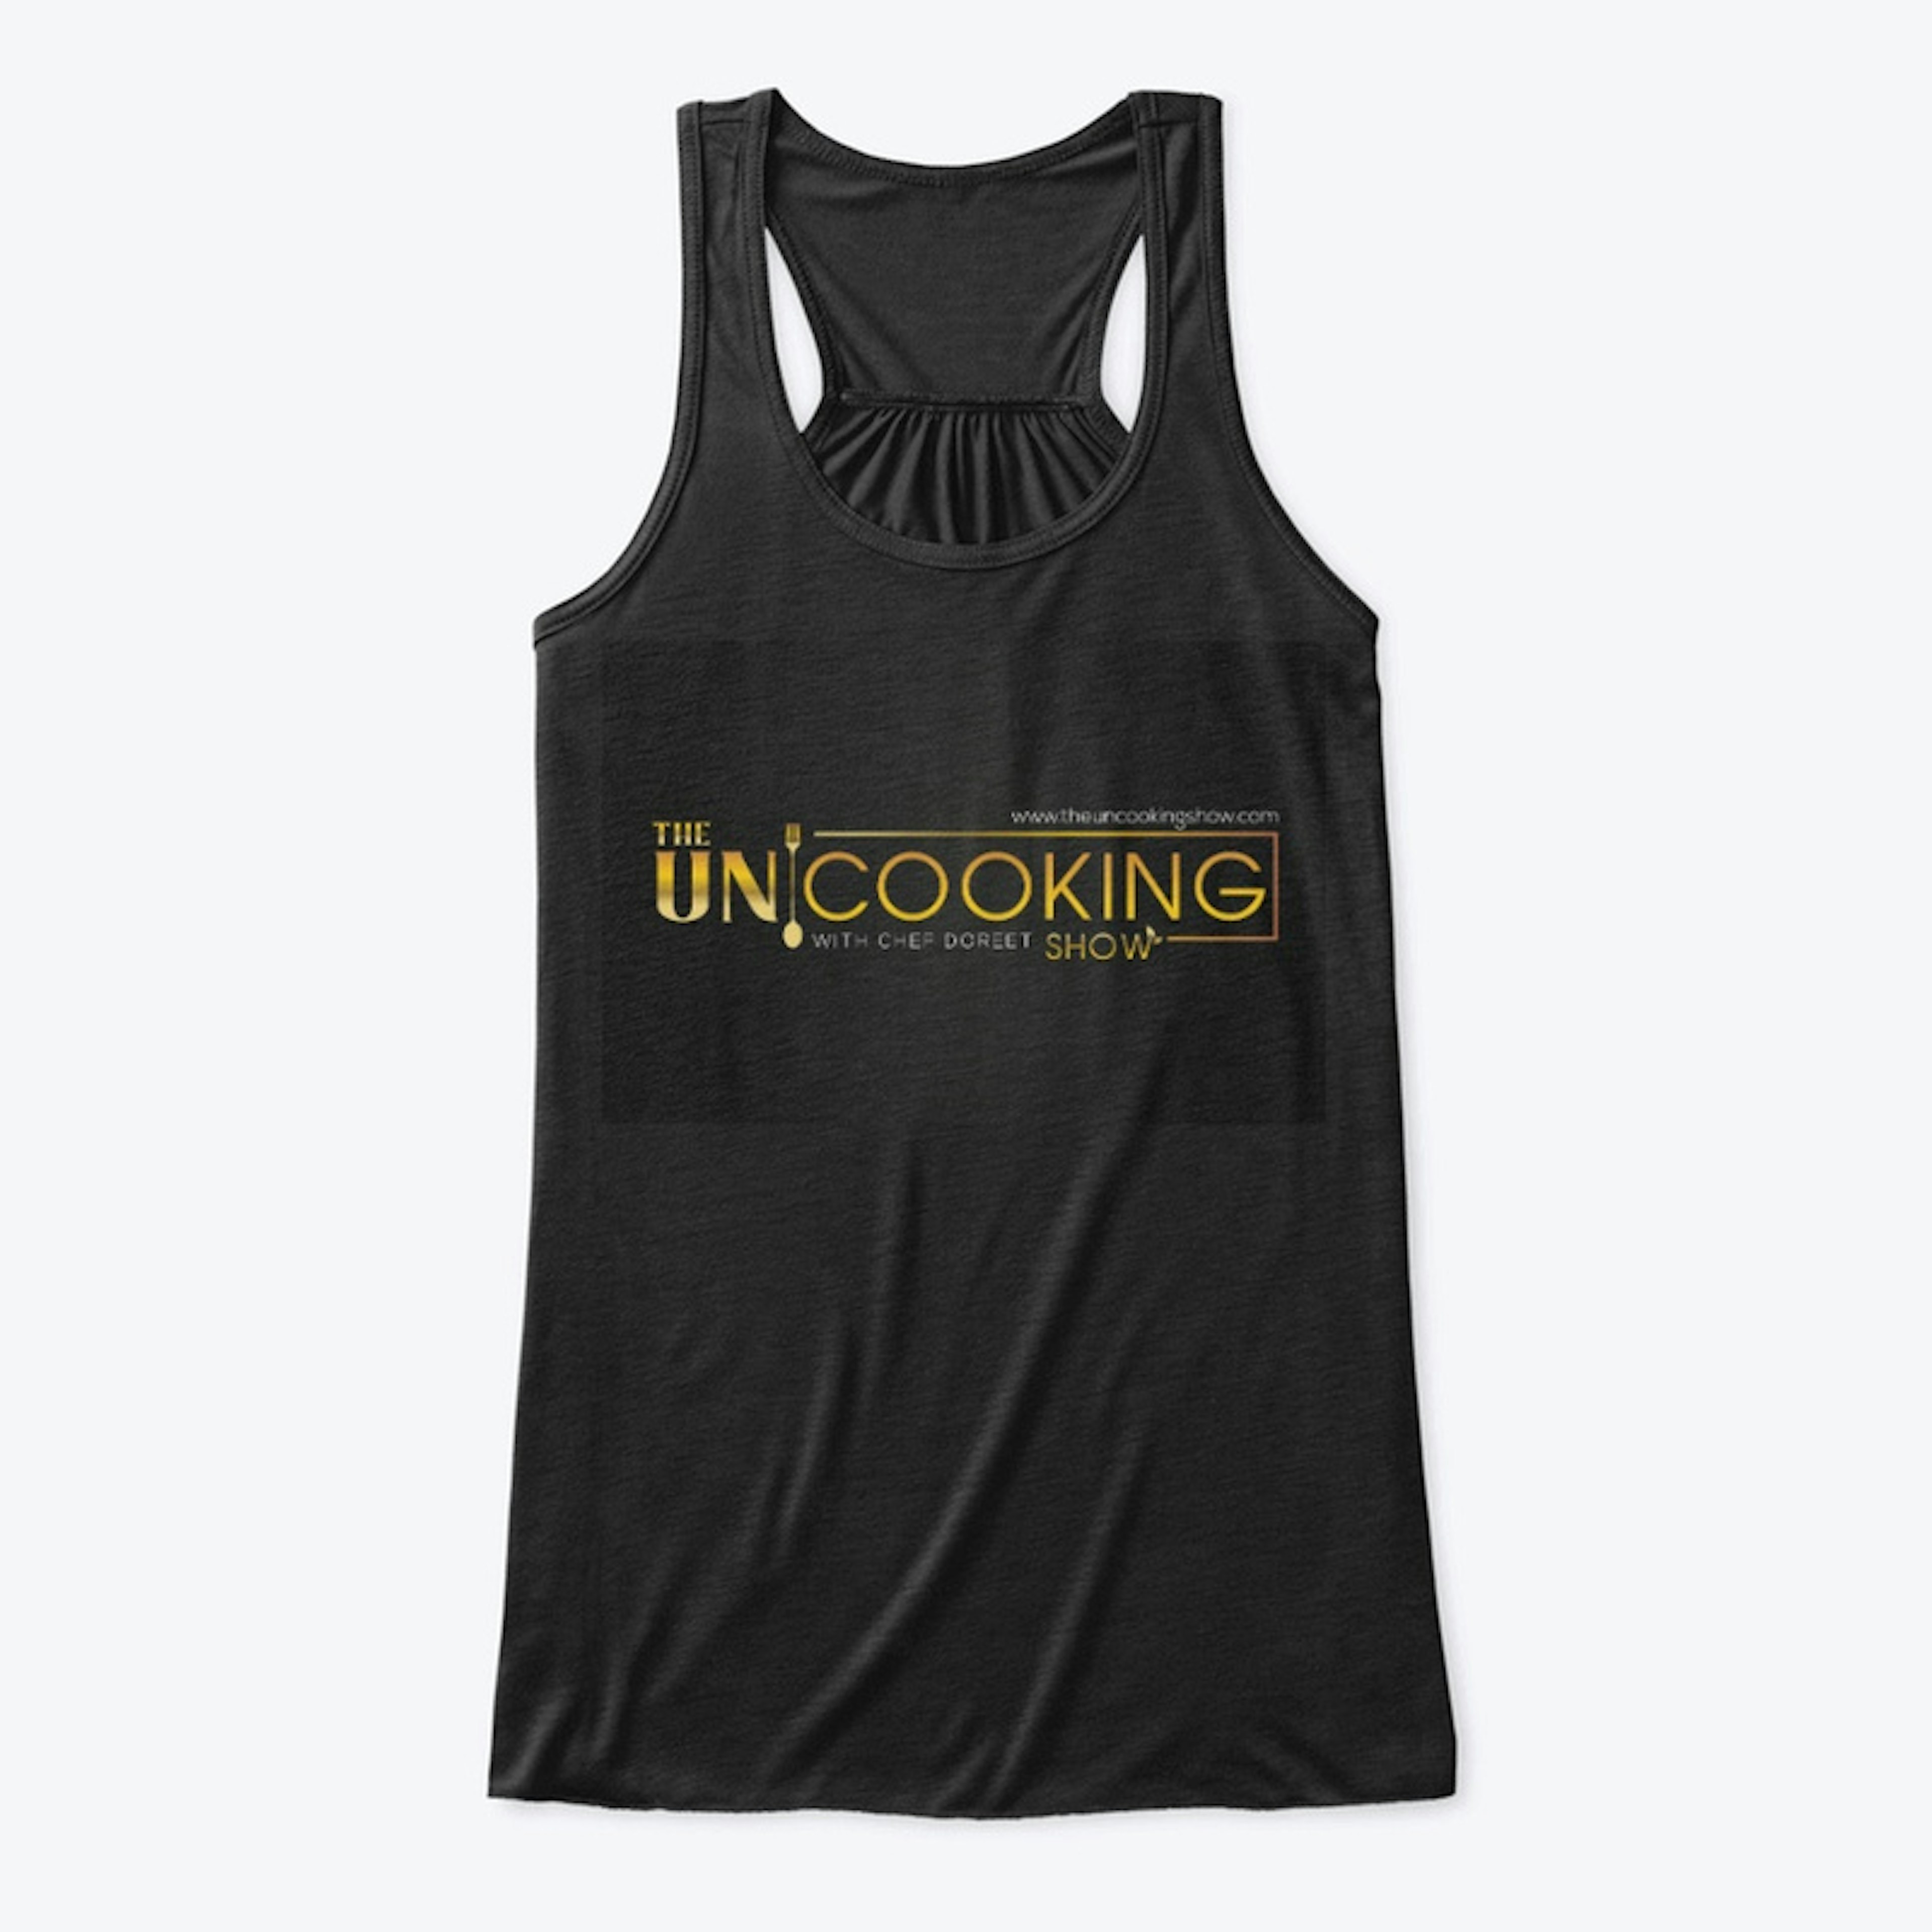 The UNcooking Show Apron